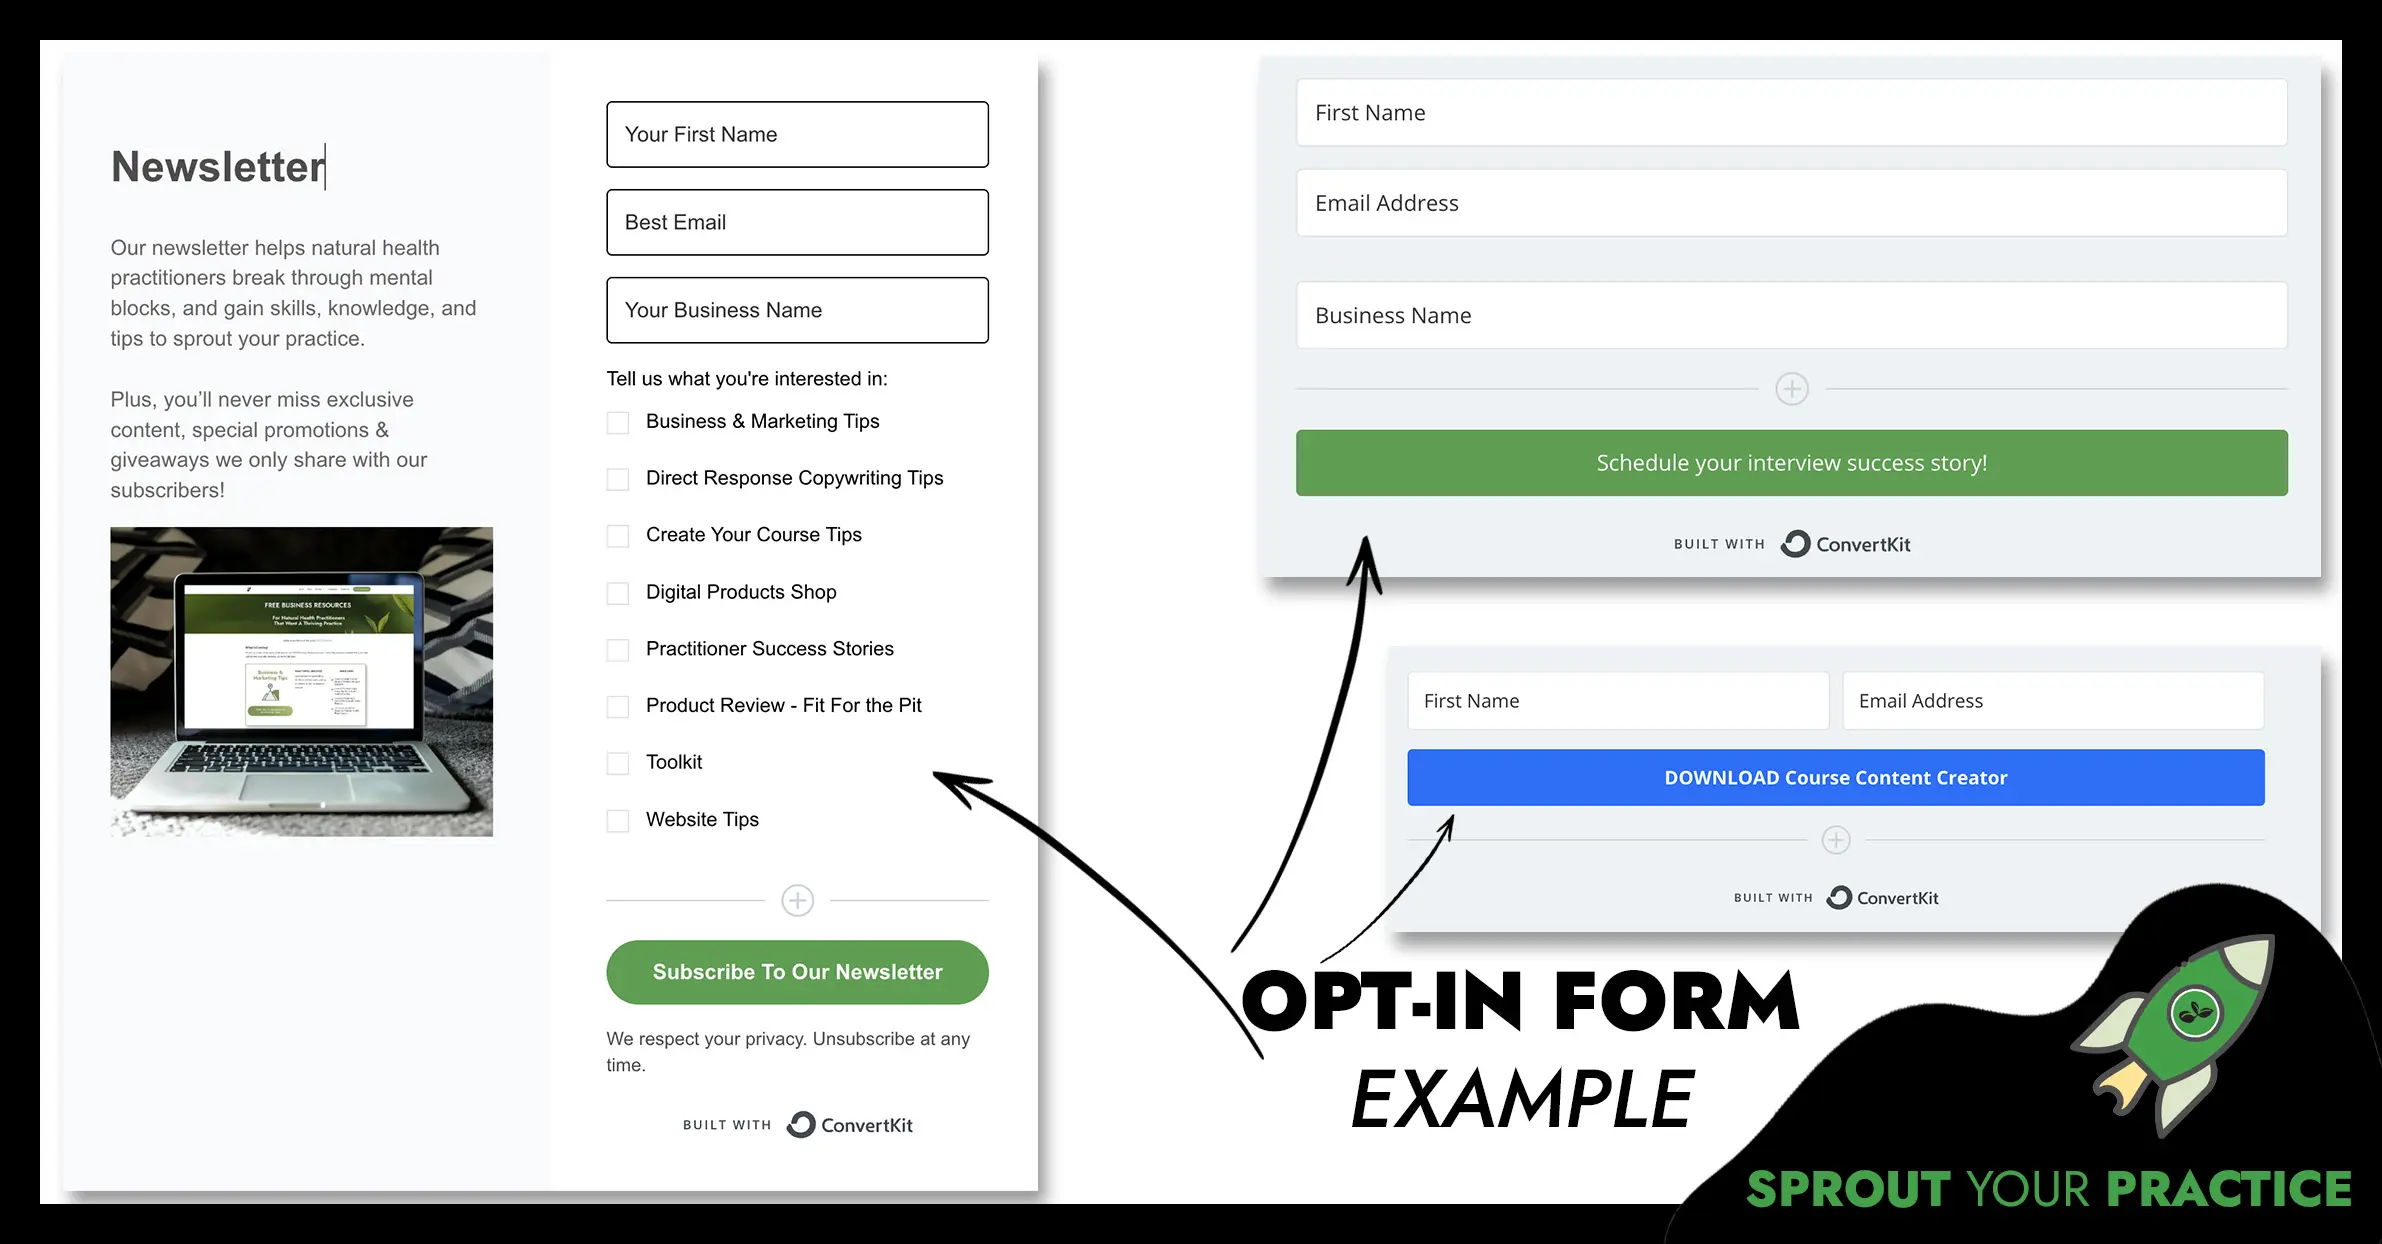 Three examples of Optin Forms from simple to advanced